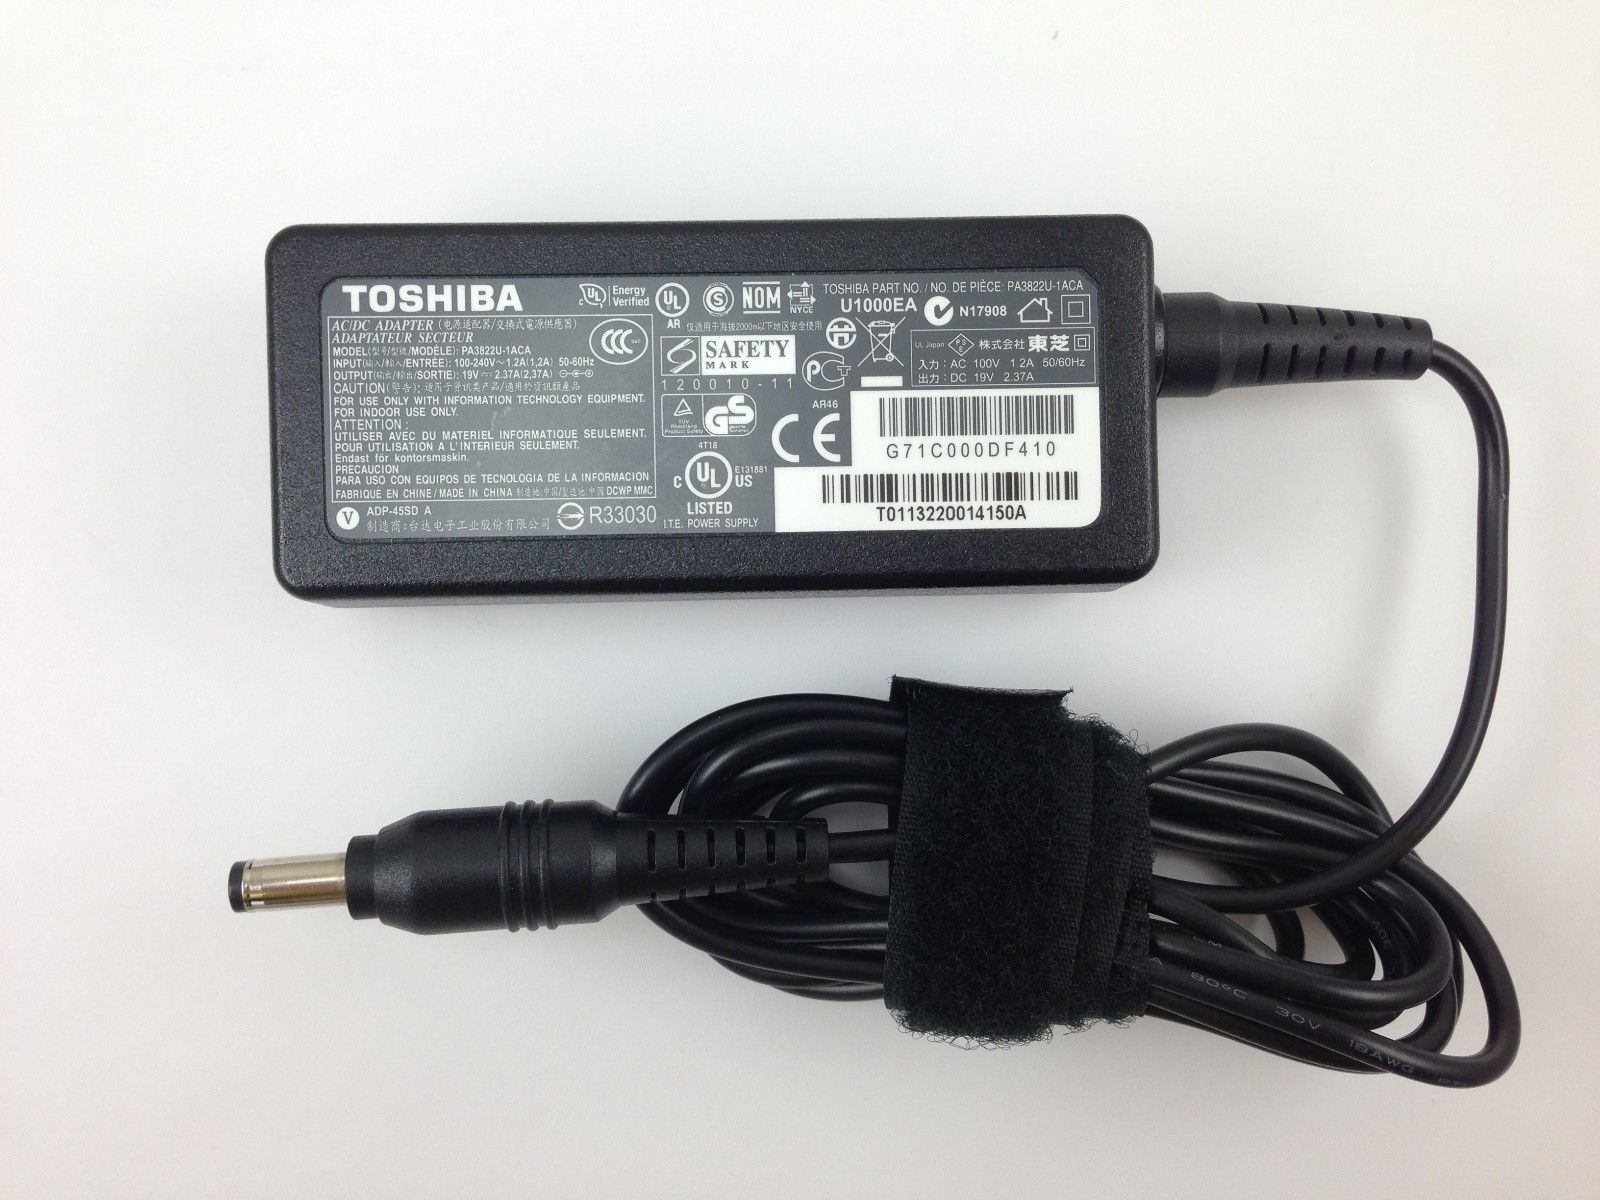 45W Toshiba Portege Z835-P370 AC Adapter Power Charger Cable